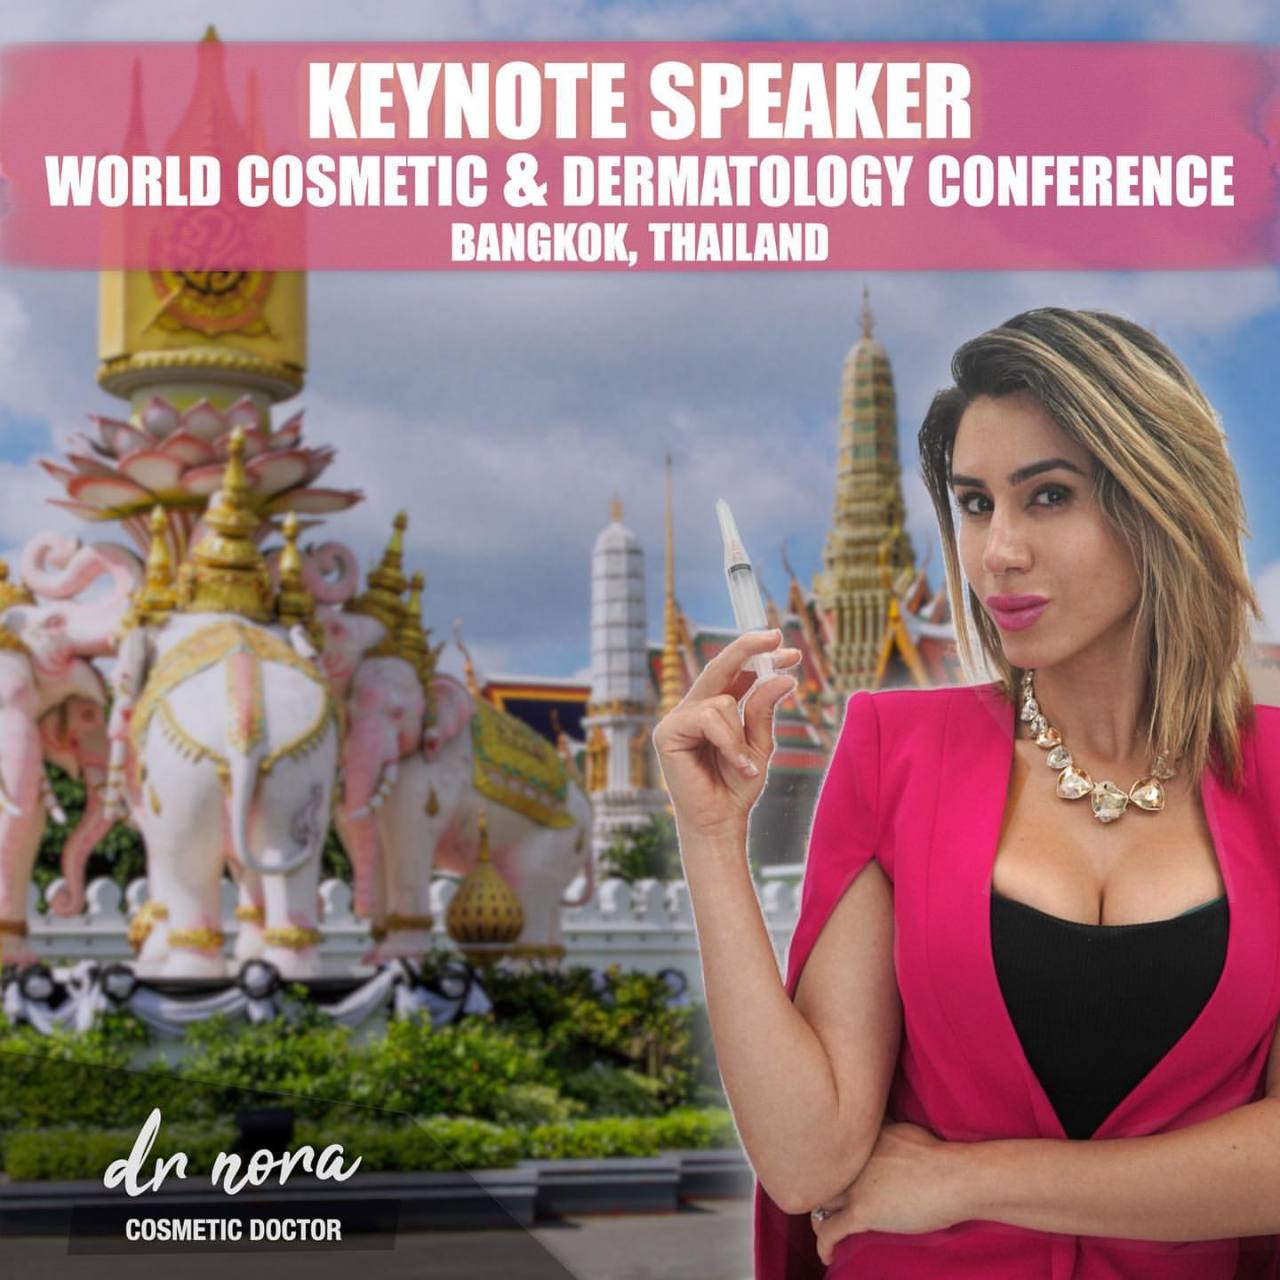 Hello Bangkok 👋I am honoured to have been asked to present as a keynote speaker at the 2020 World Cosmetic & Dermatology Conference over in Bangkok, Thailand later this month. I’ll be discussing the use of Treatment Pad, a digital application that I...